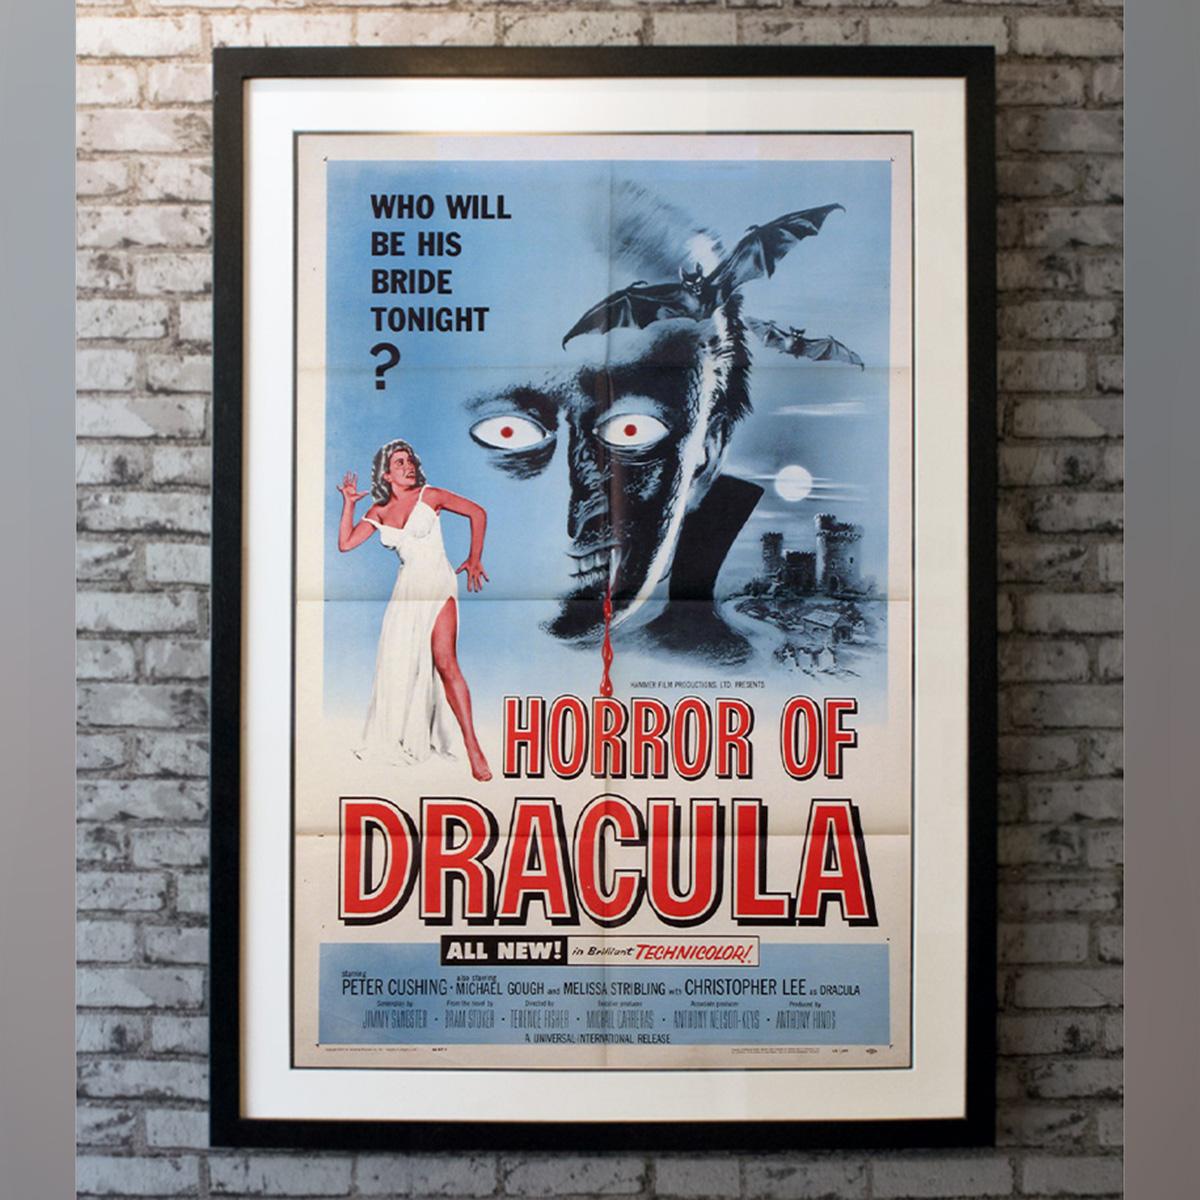 On a search for his missing friend Jonathan Harker (John Van Eyssen), vampire hunter Dr. Van Helsing (Peter Cushing) is led to Count Dracula's (Christopher Lee) castle. Upon arriving, Van Helsing finds an undead Harker in Dracula's crypt and